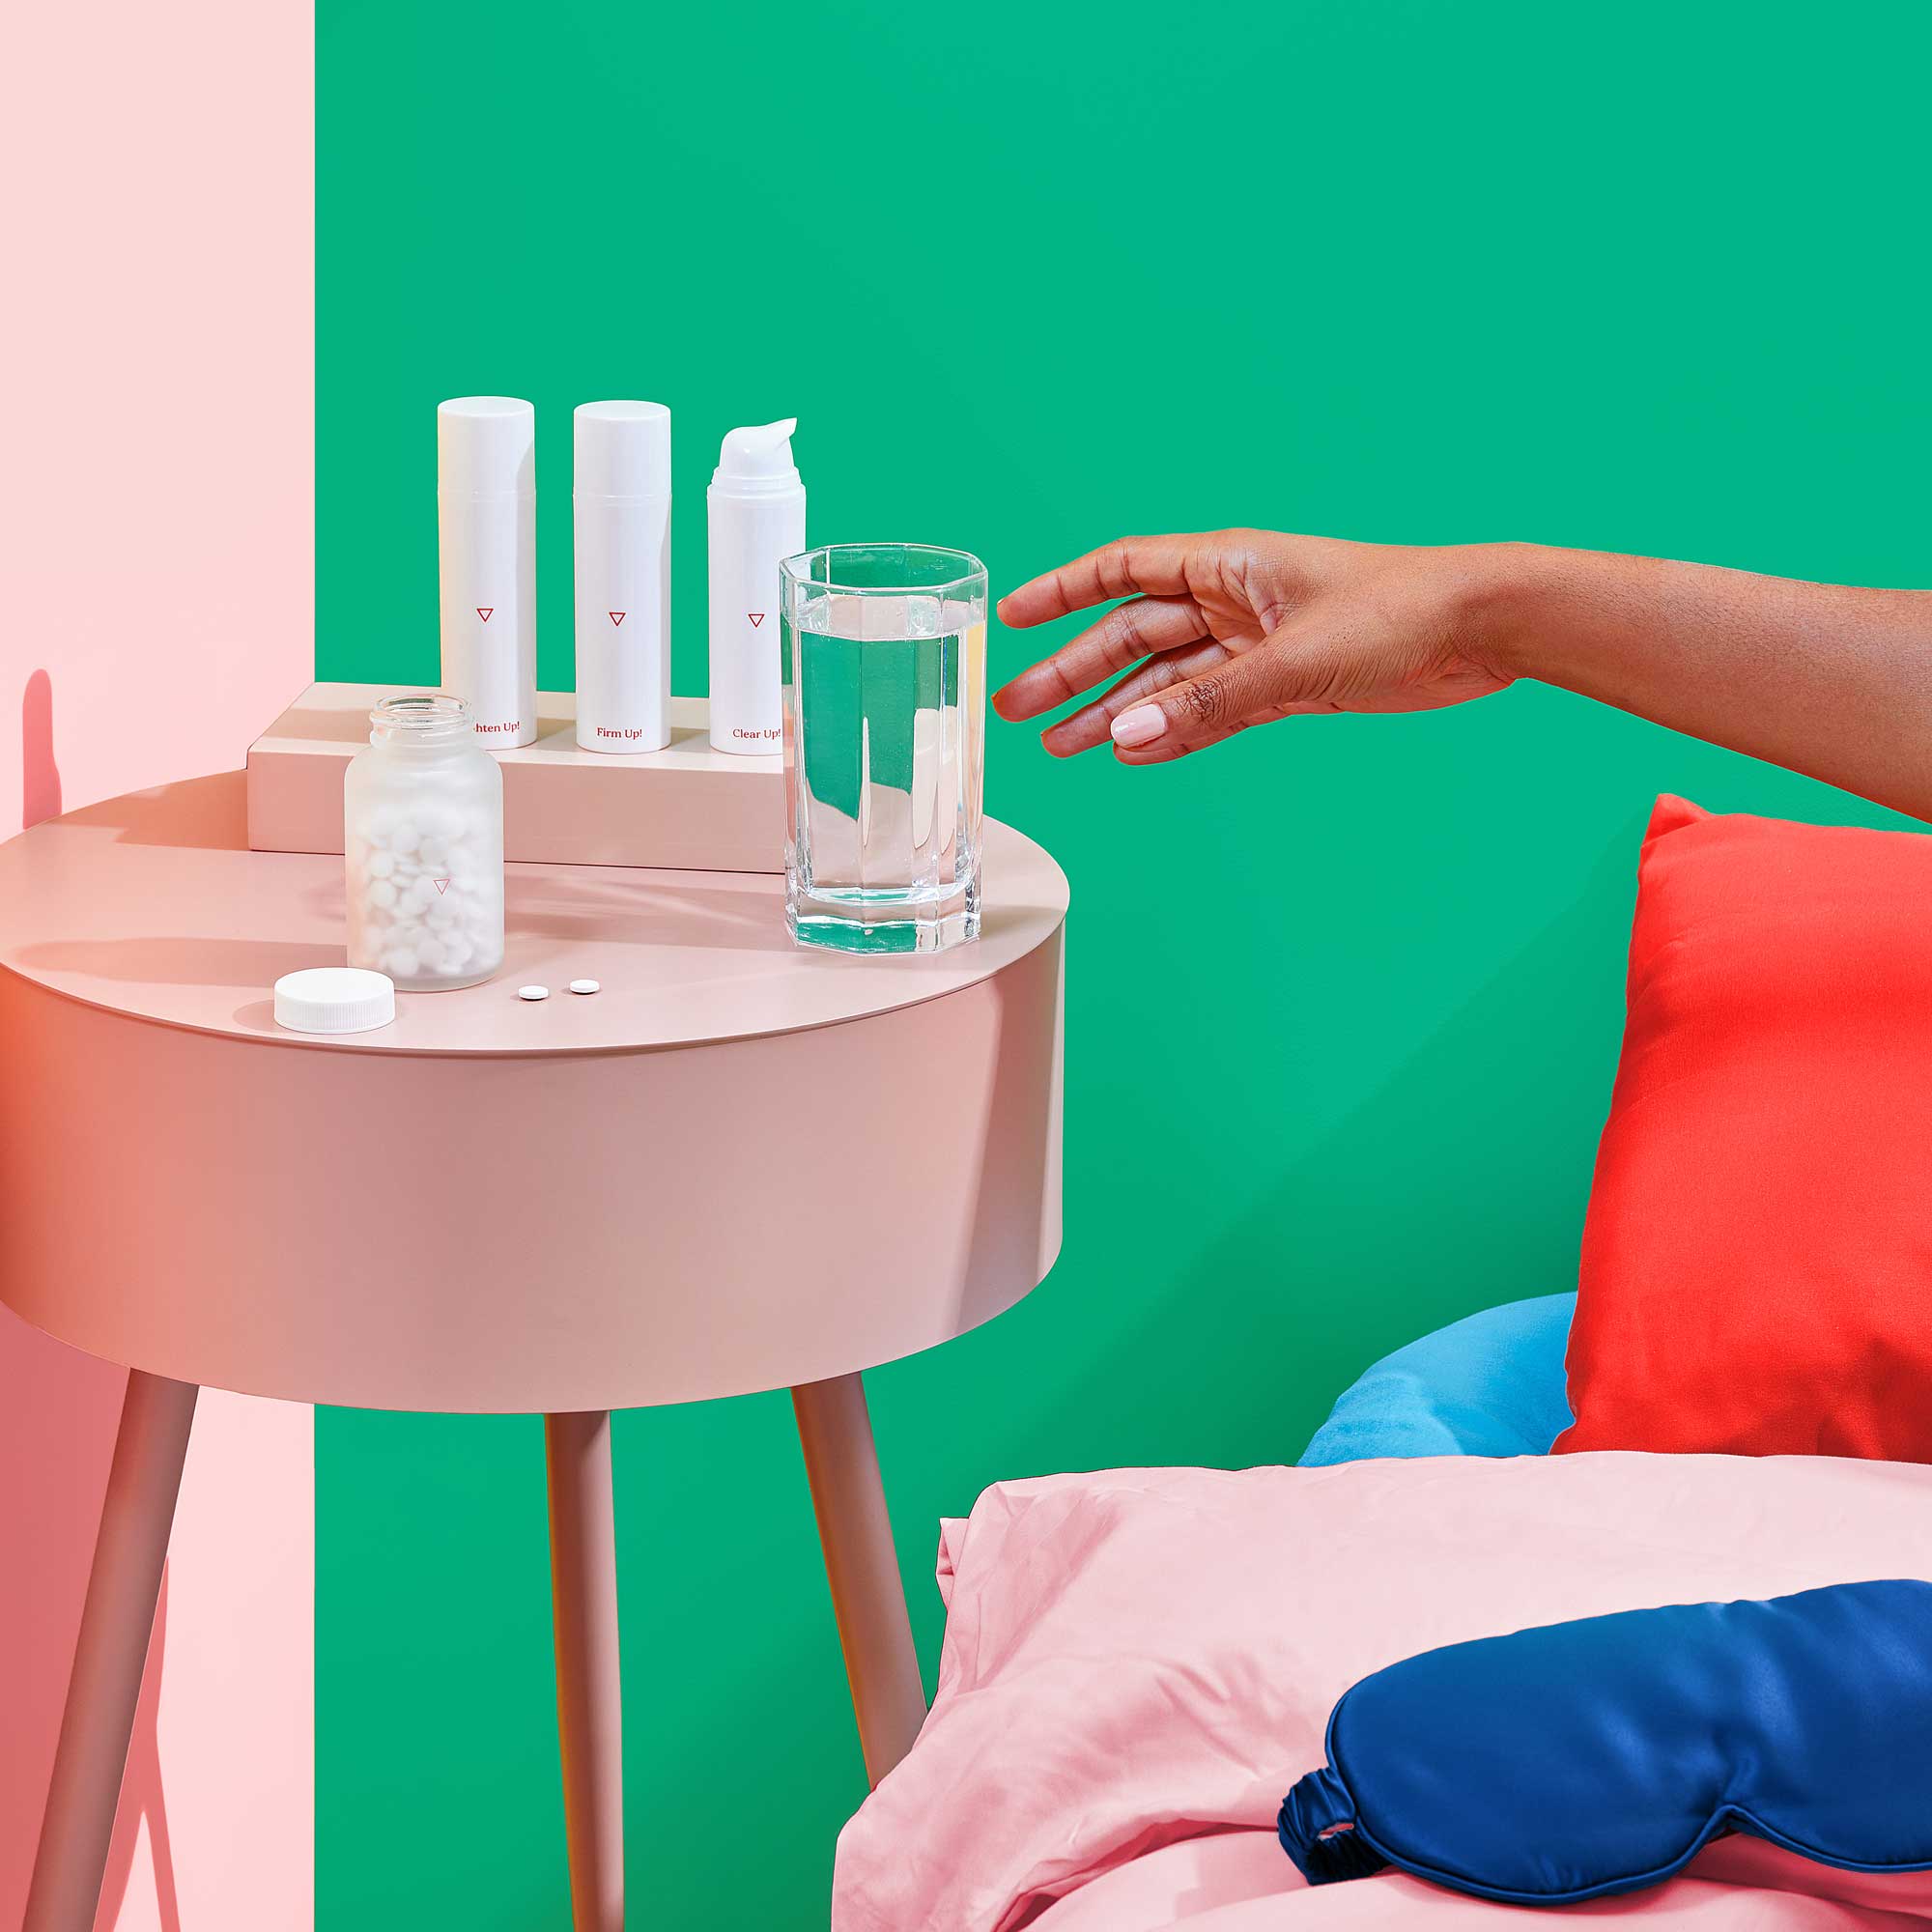 Woman's hand reaches for glass of water next to Wisp Skincare bottles on her bedside table